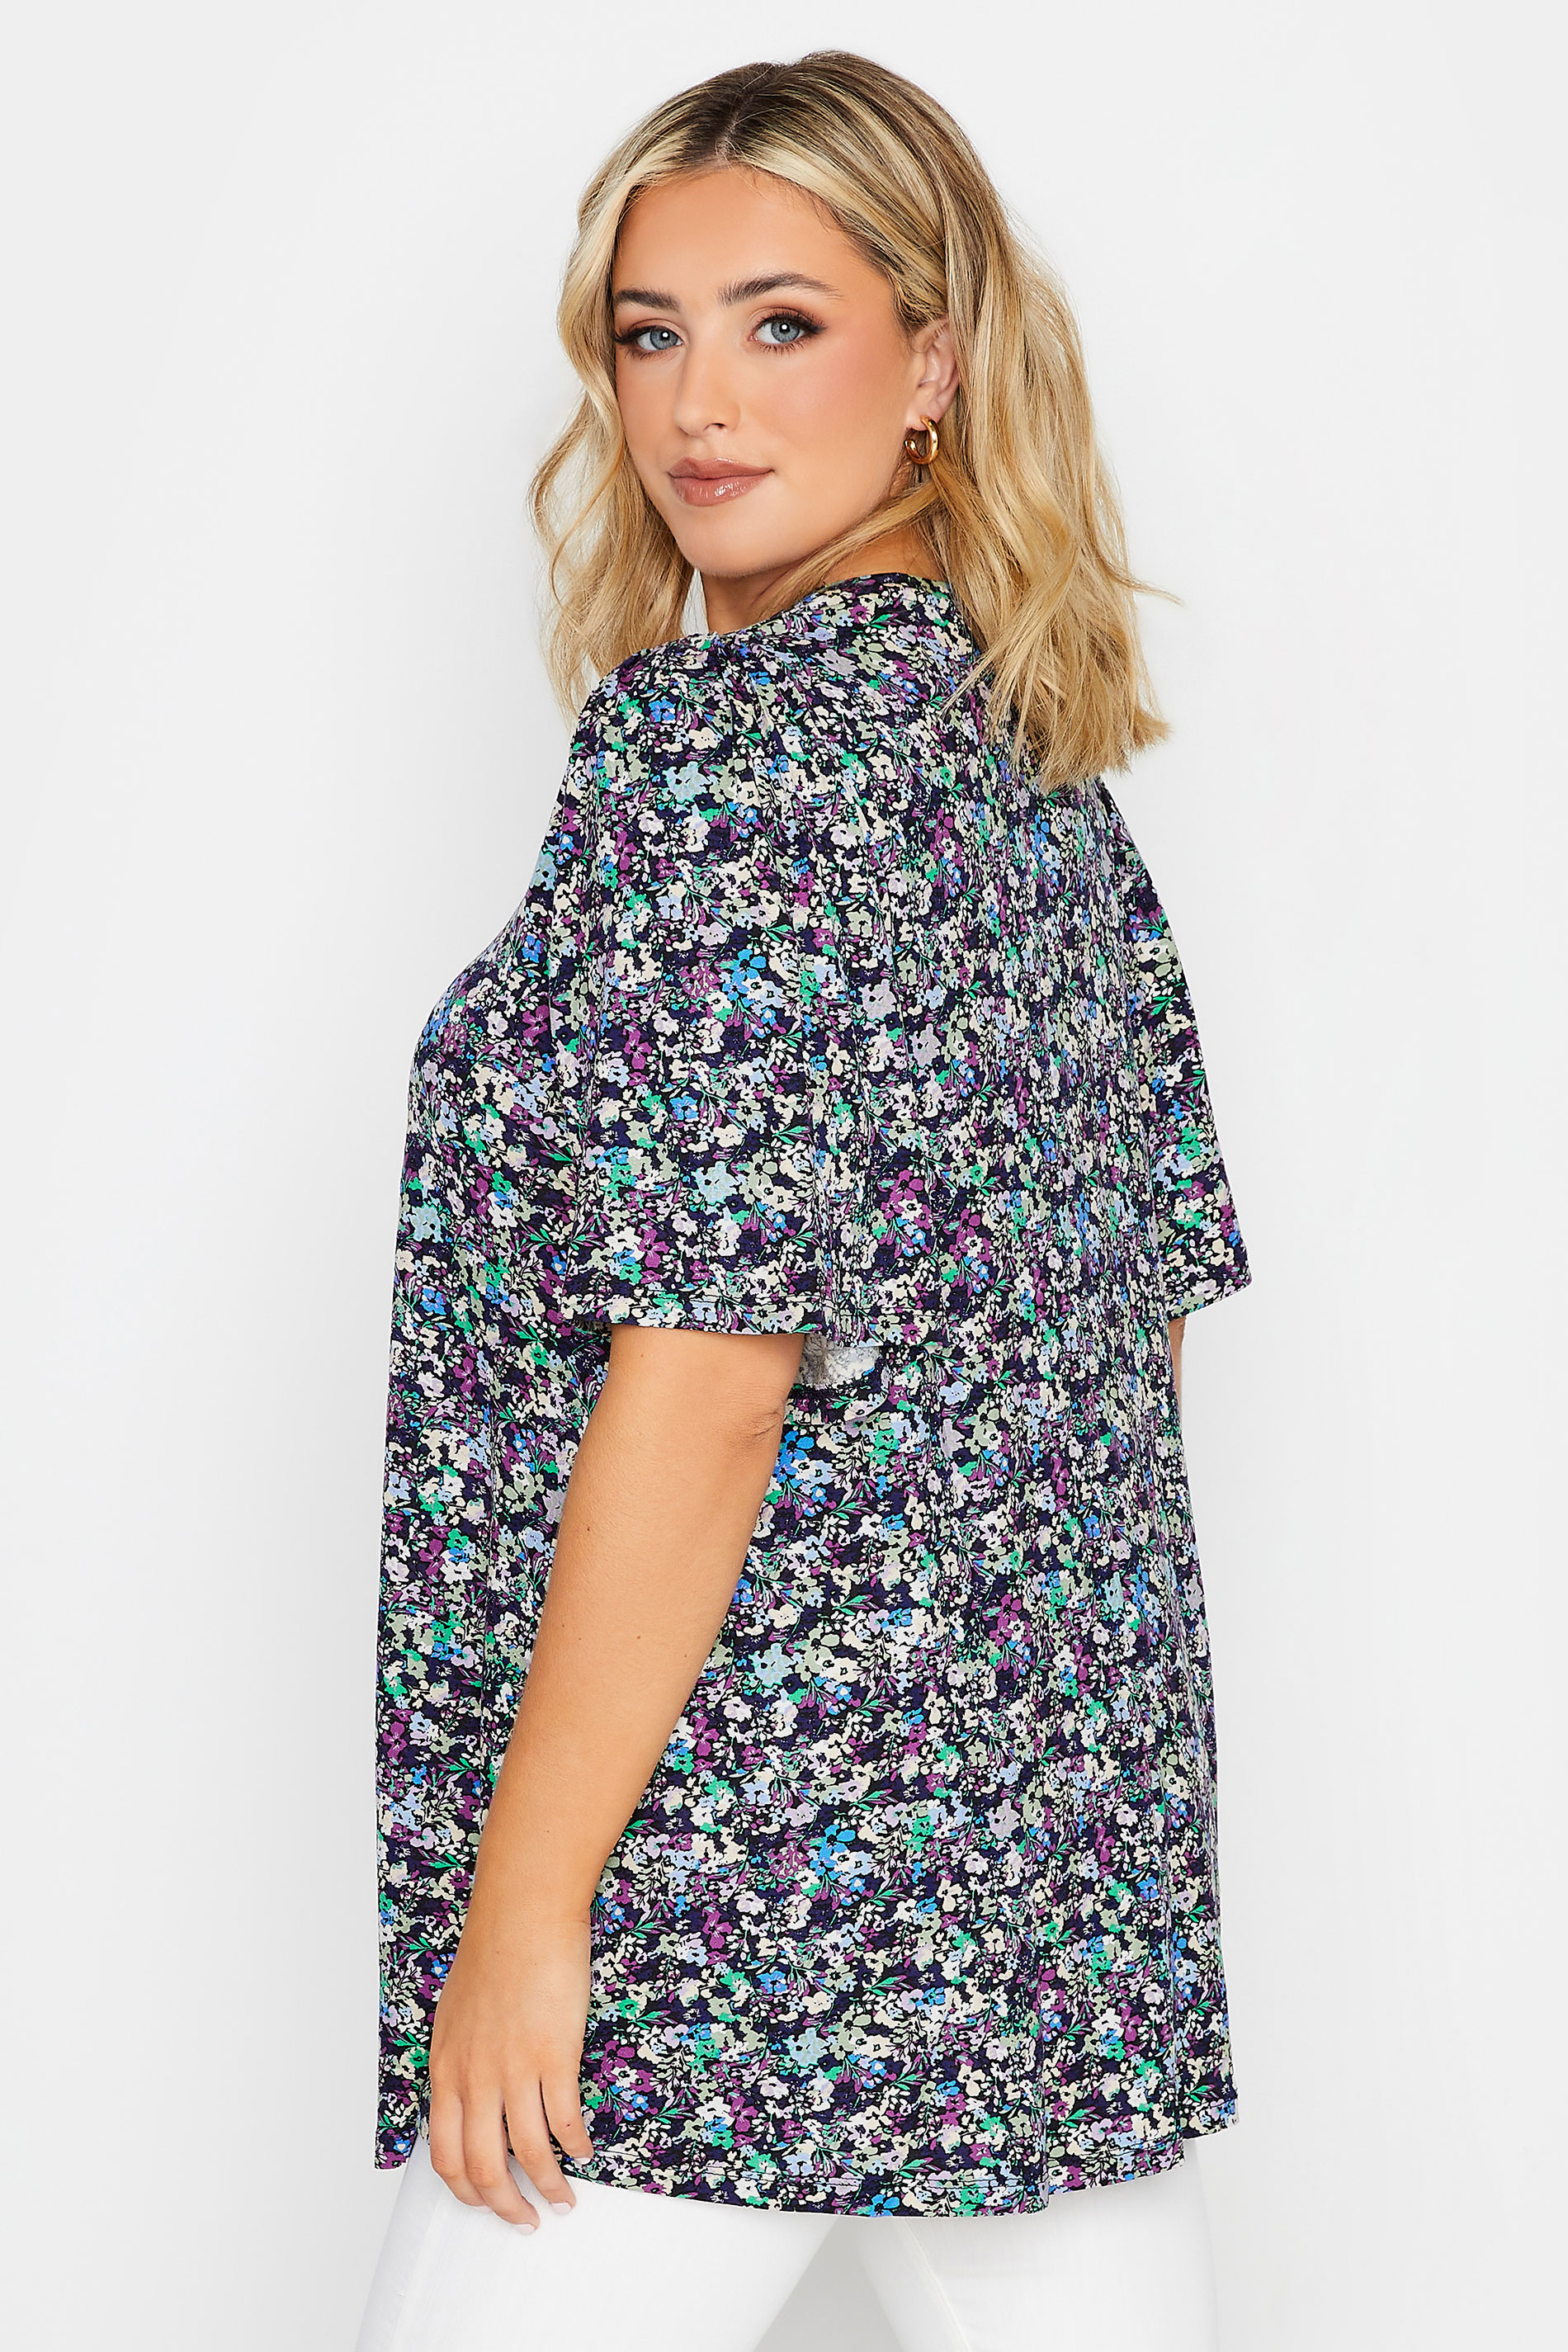 YOURS Plus Size Black Floral Pleat Front Swing Top | Yours Clothing 3